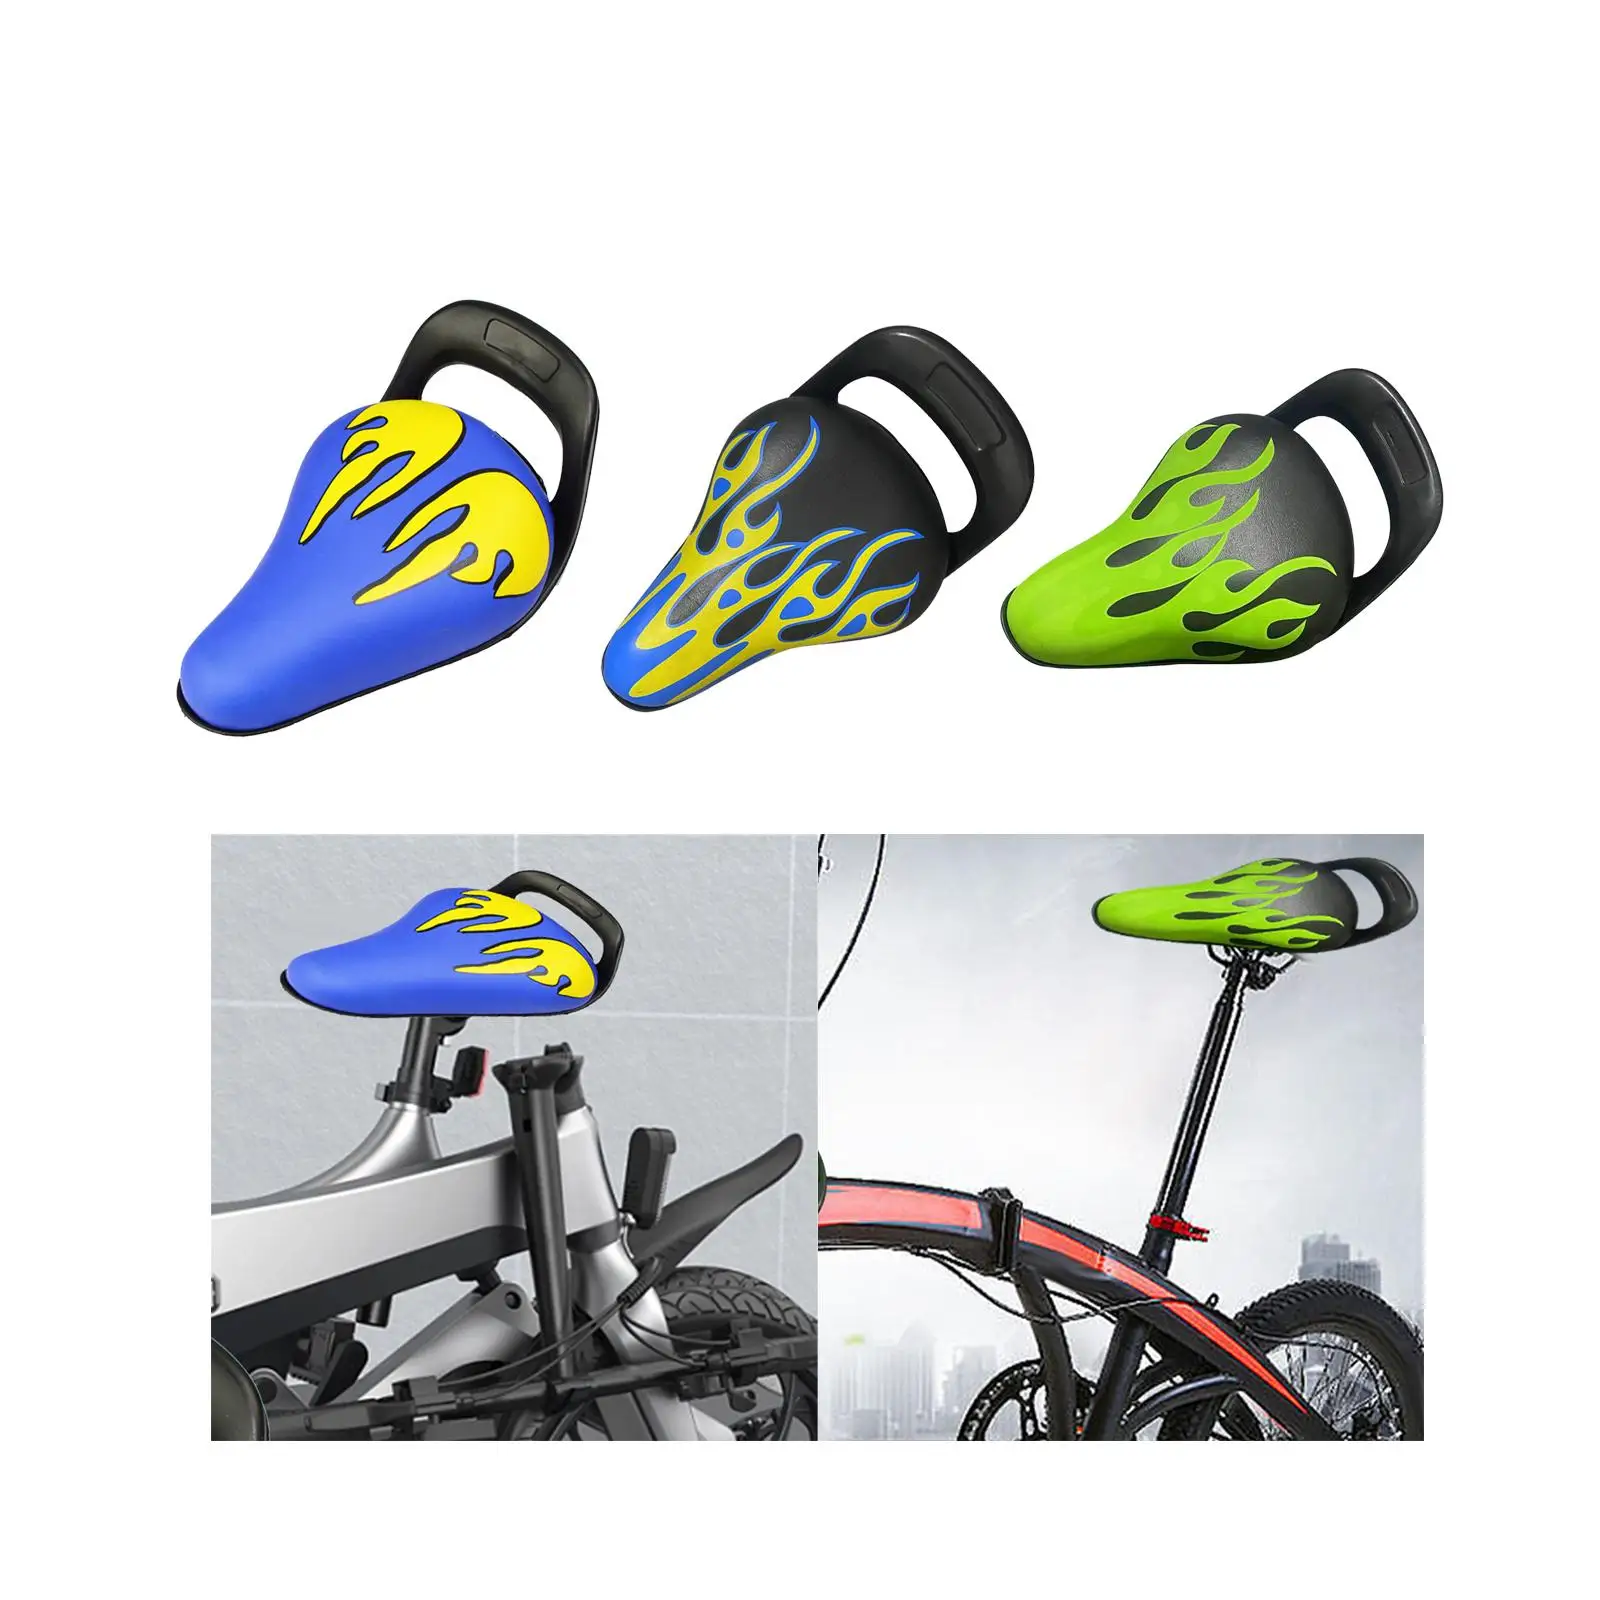 Kids Bike Cushion Waterproof Multiple Color Options Bike Seat for Kids for Most Kid Bicycles Boys and Girls Bicycle